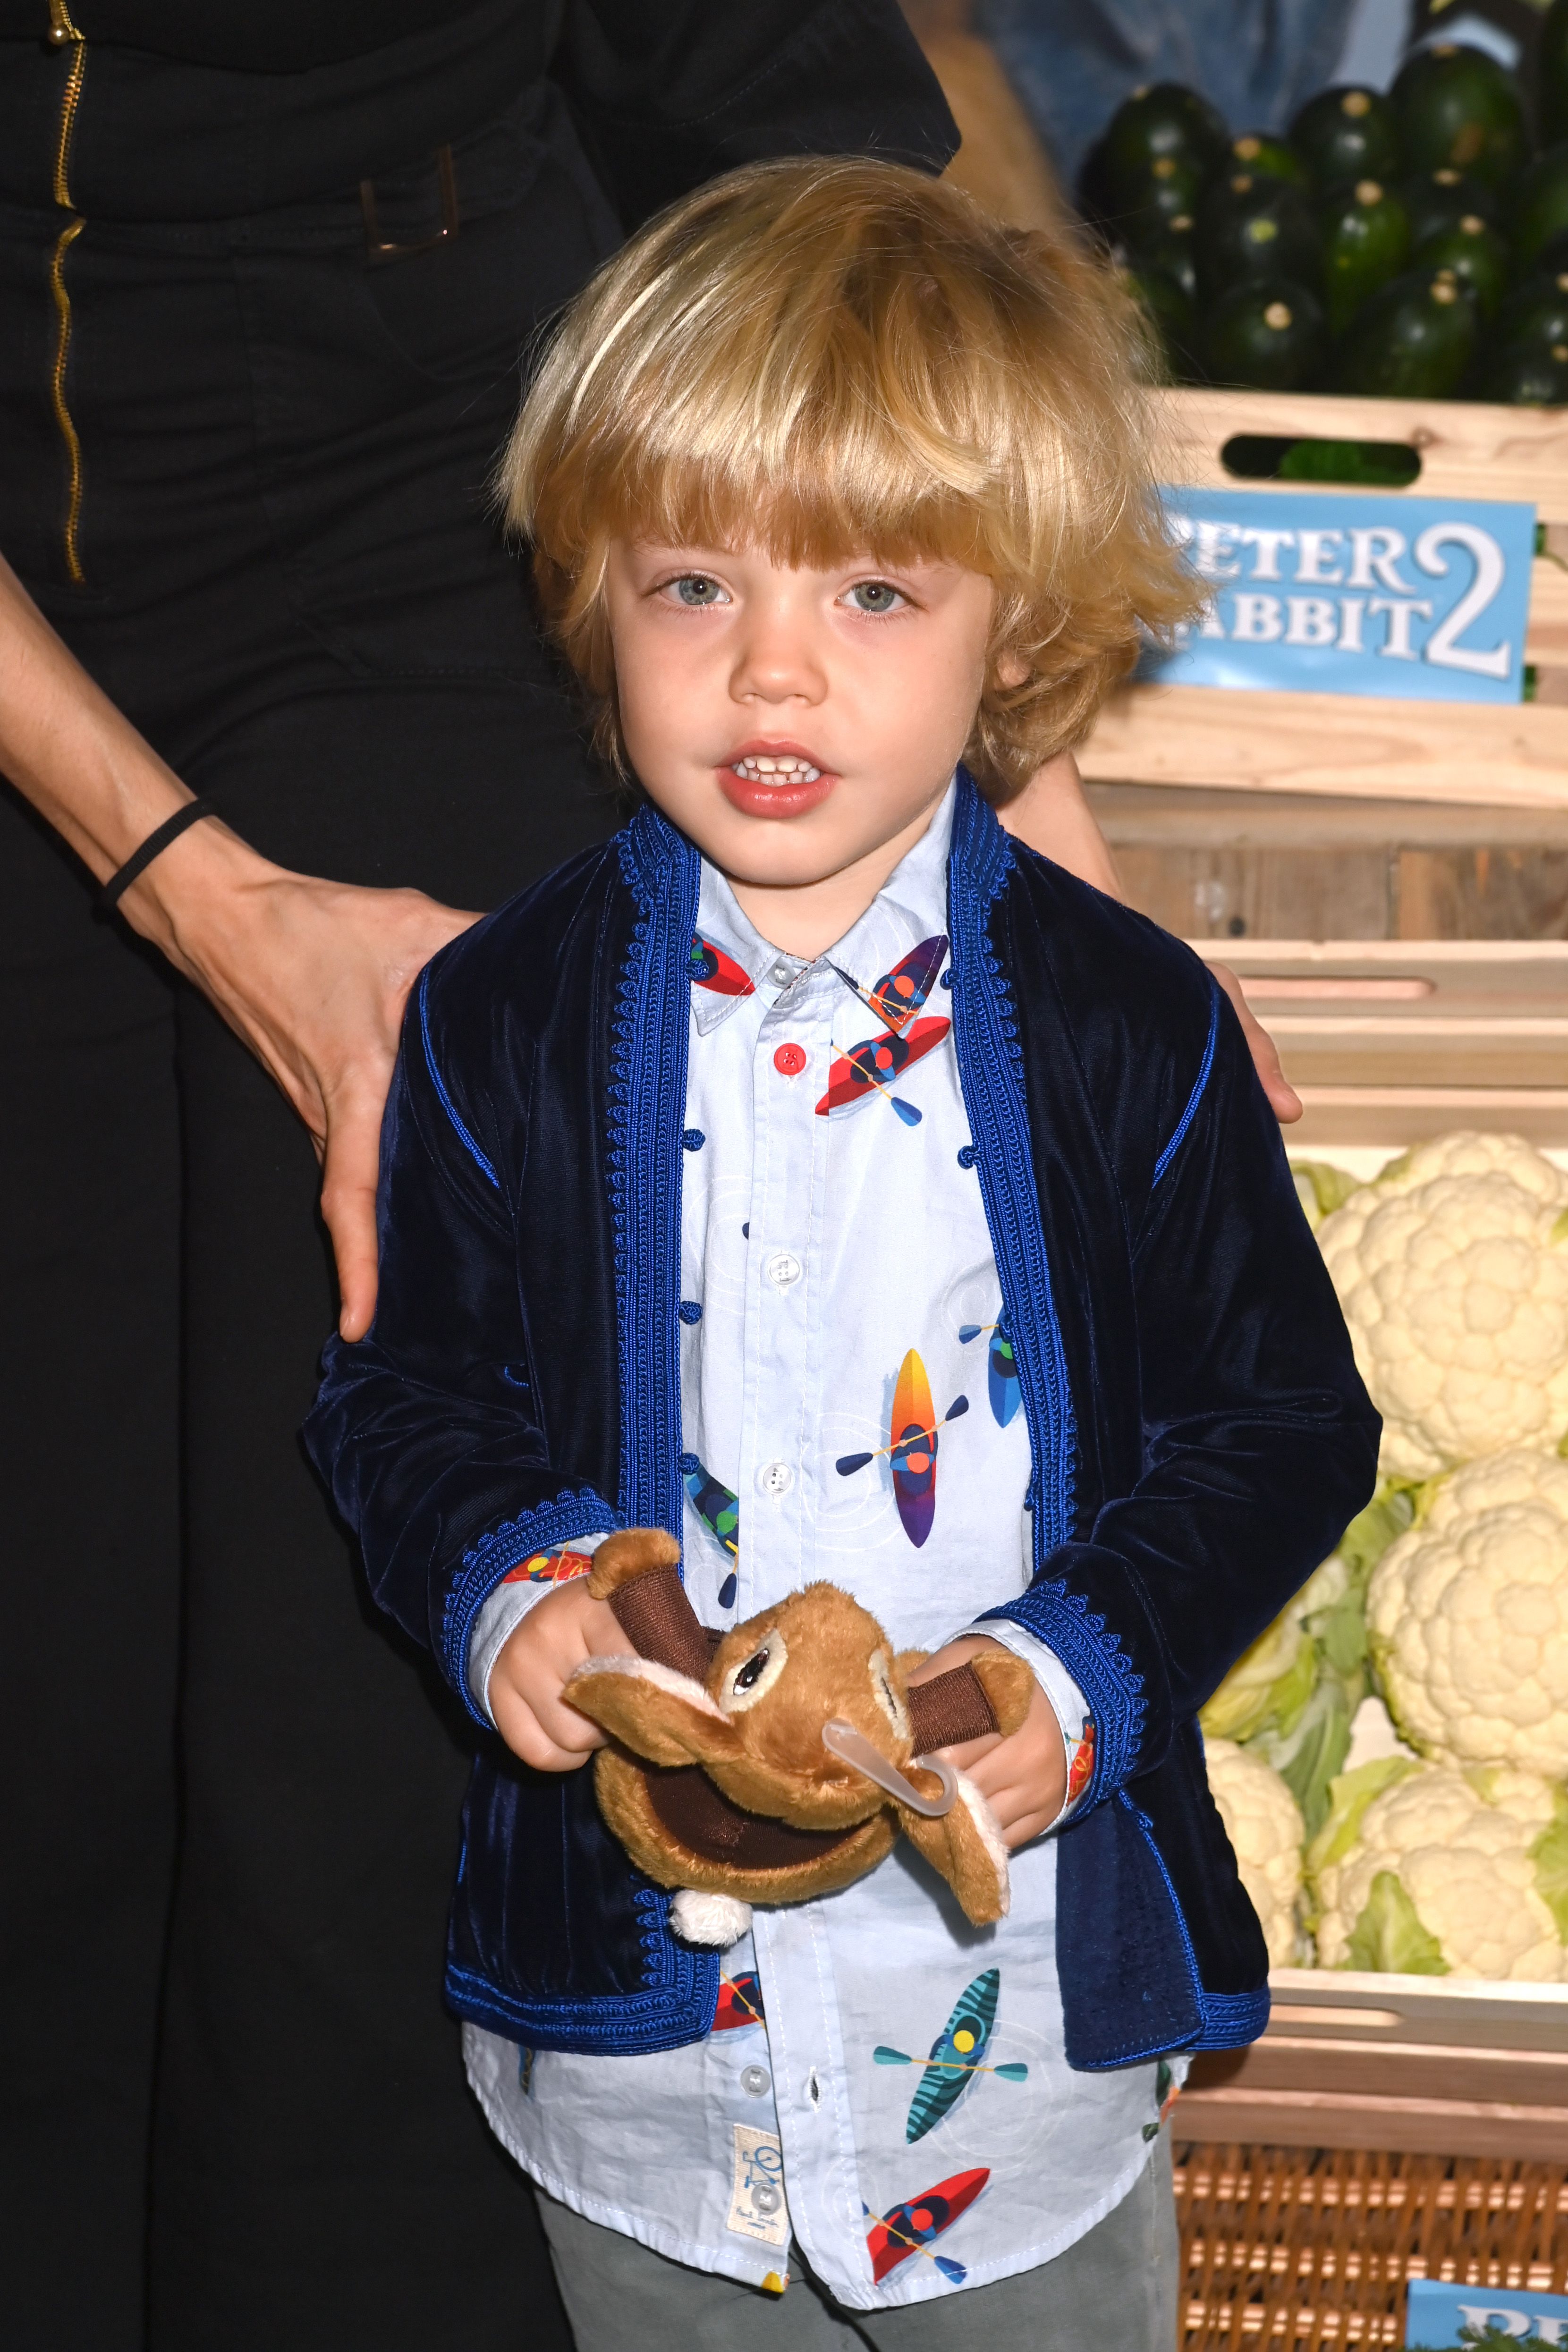 Mick Jagger's son Dev Jagger attends the "Peter Rabbit 2" UK Gala Screening at Picturehouse Central on May 23, 2021 | Photo: Getty Images